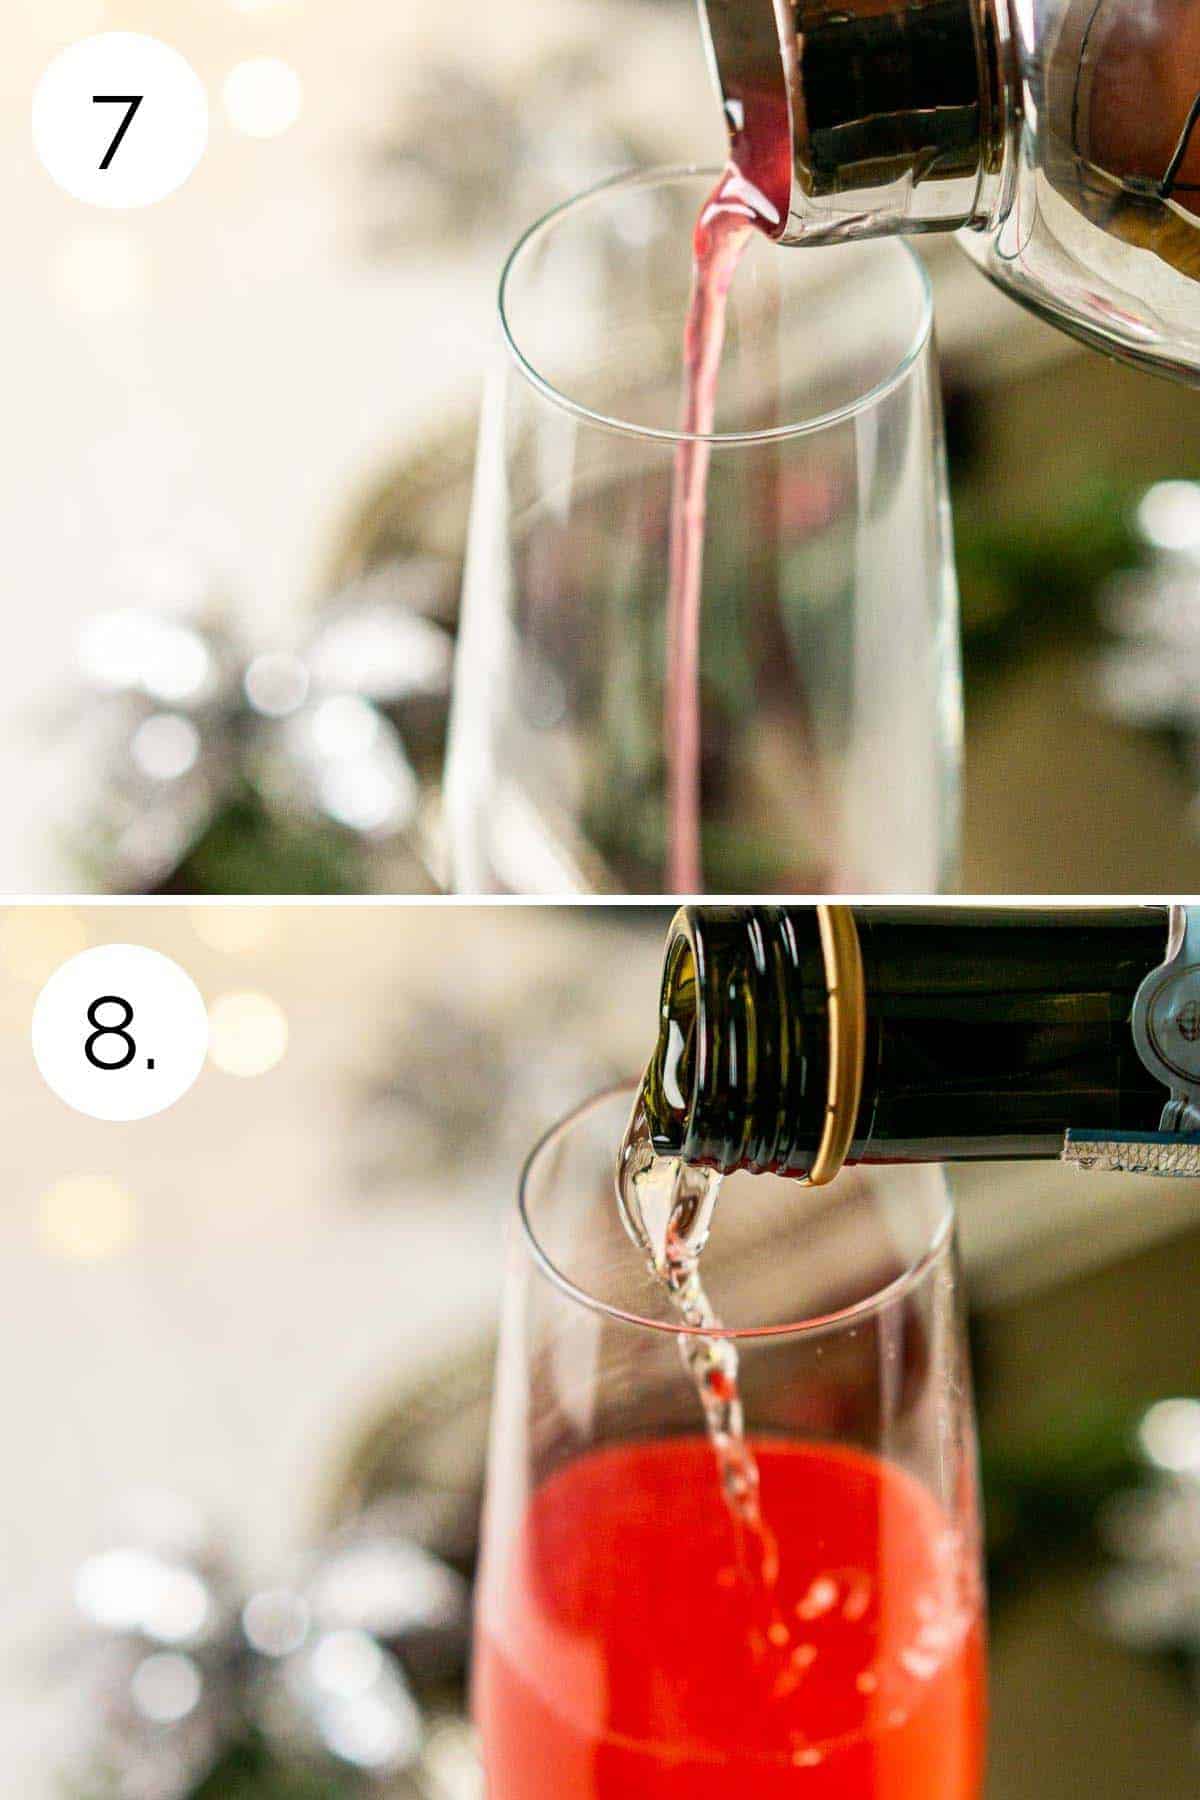 A collage showing the process of straining the cocktail shaker and pouring in the Champagne.